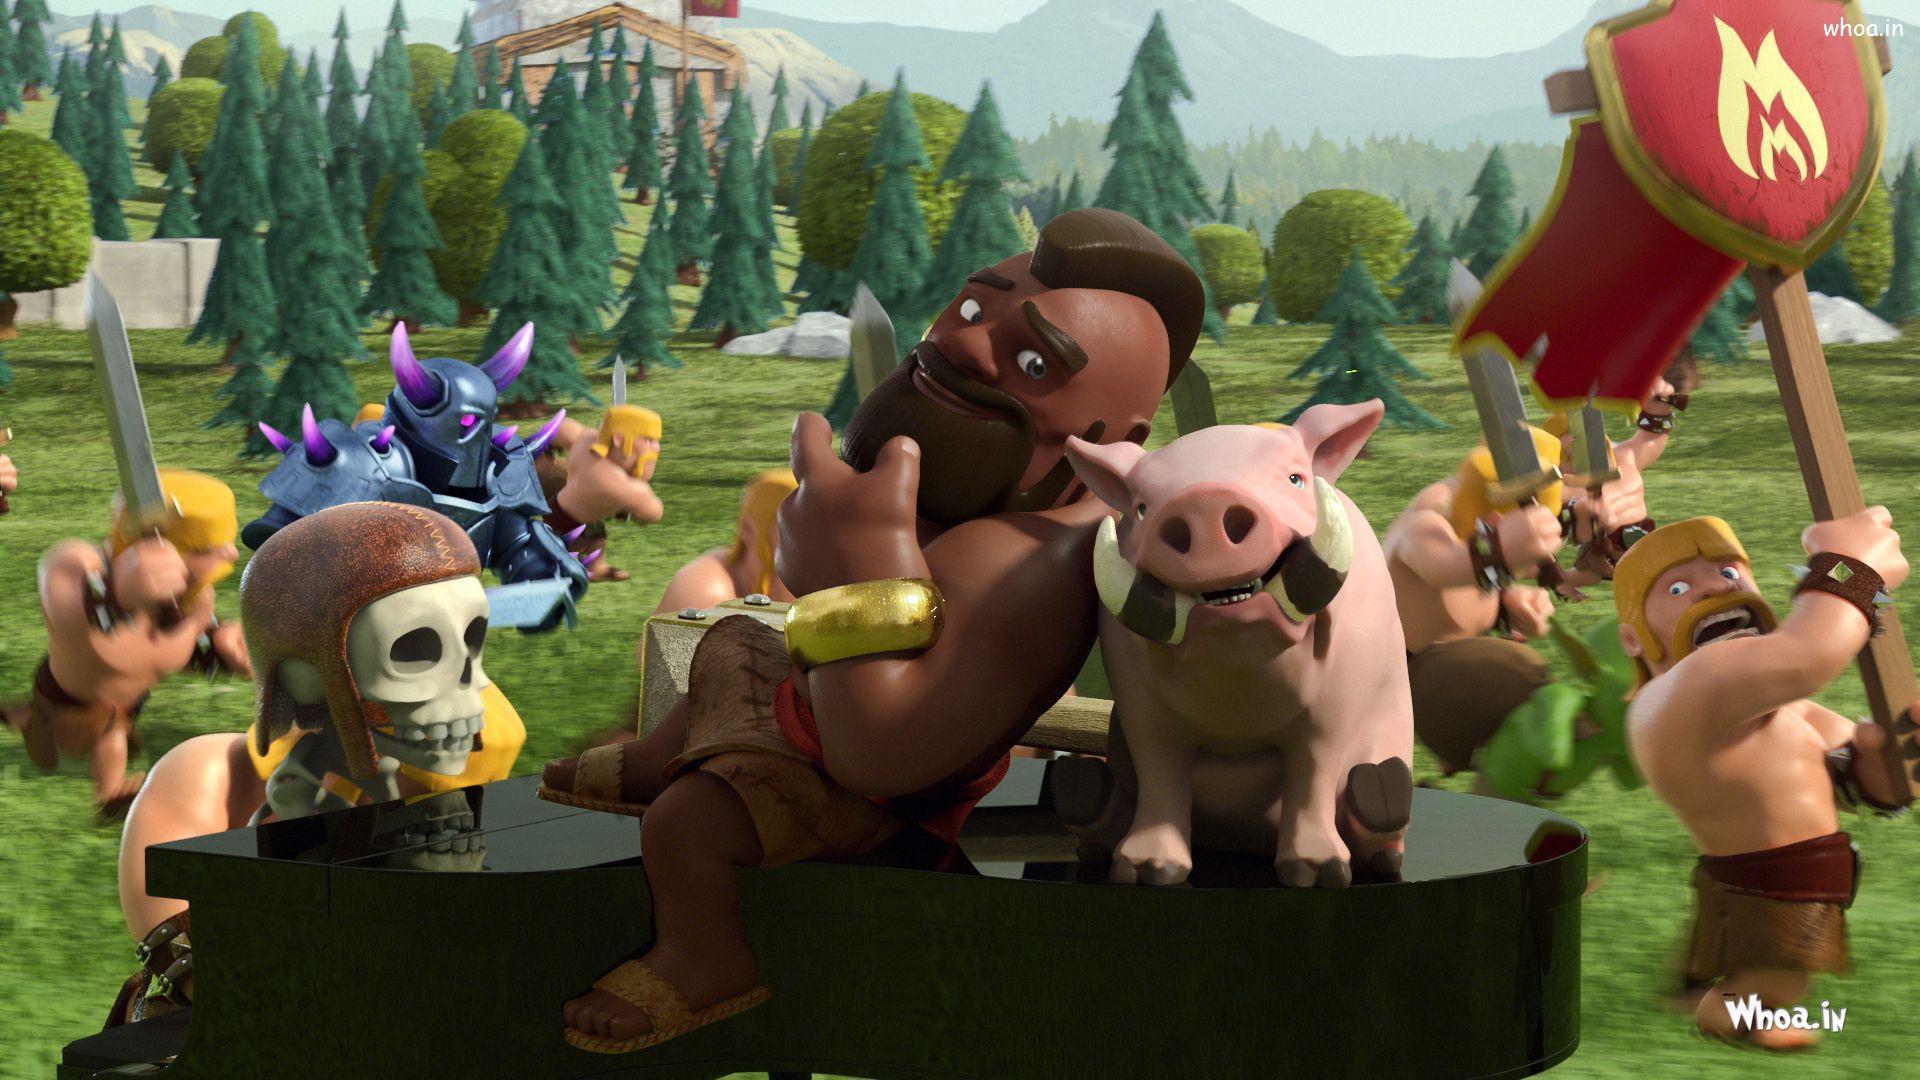 Clash Of Clans Game Hd Images & Wallpapers Coc Game #4 Clash-Of-Clans  Wallpaper